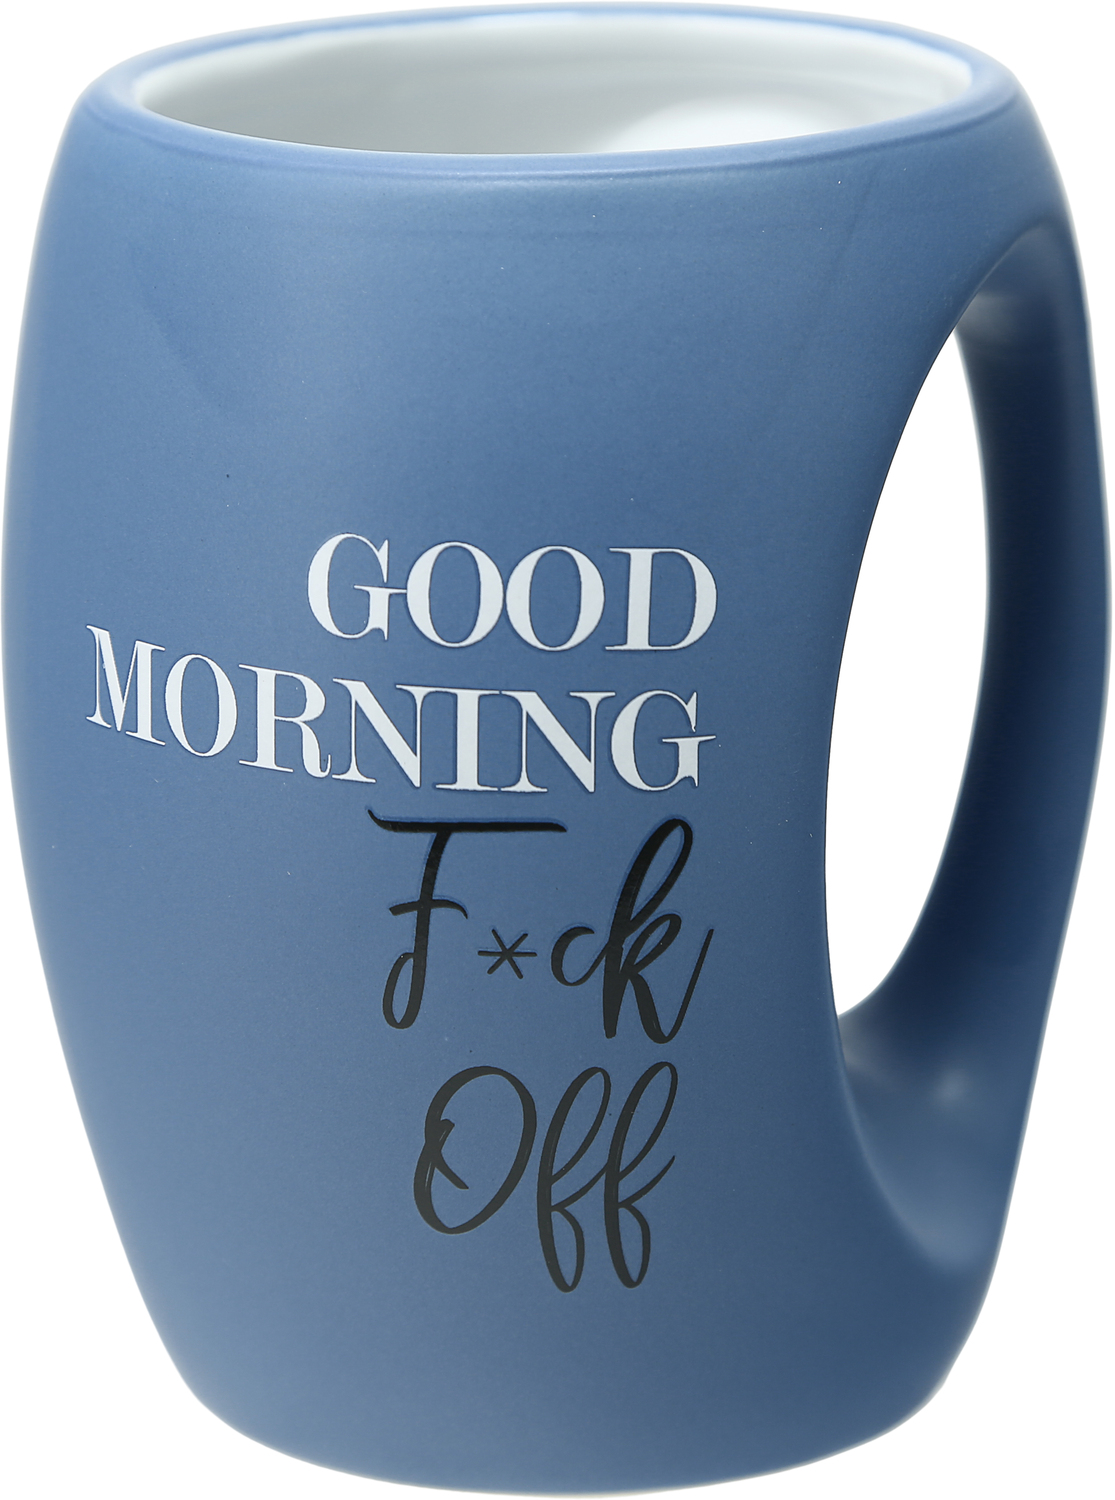 F*ck Off by Good Morning - F*ck Off - 16 oz Cup